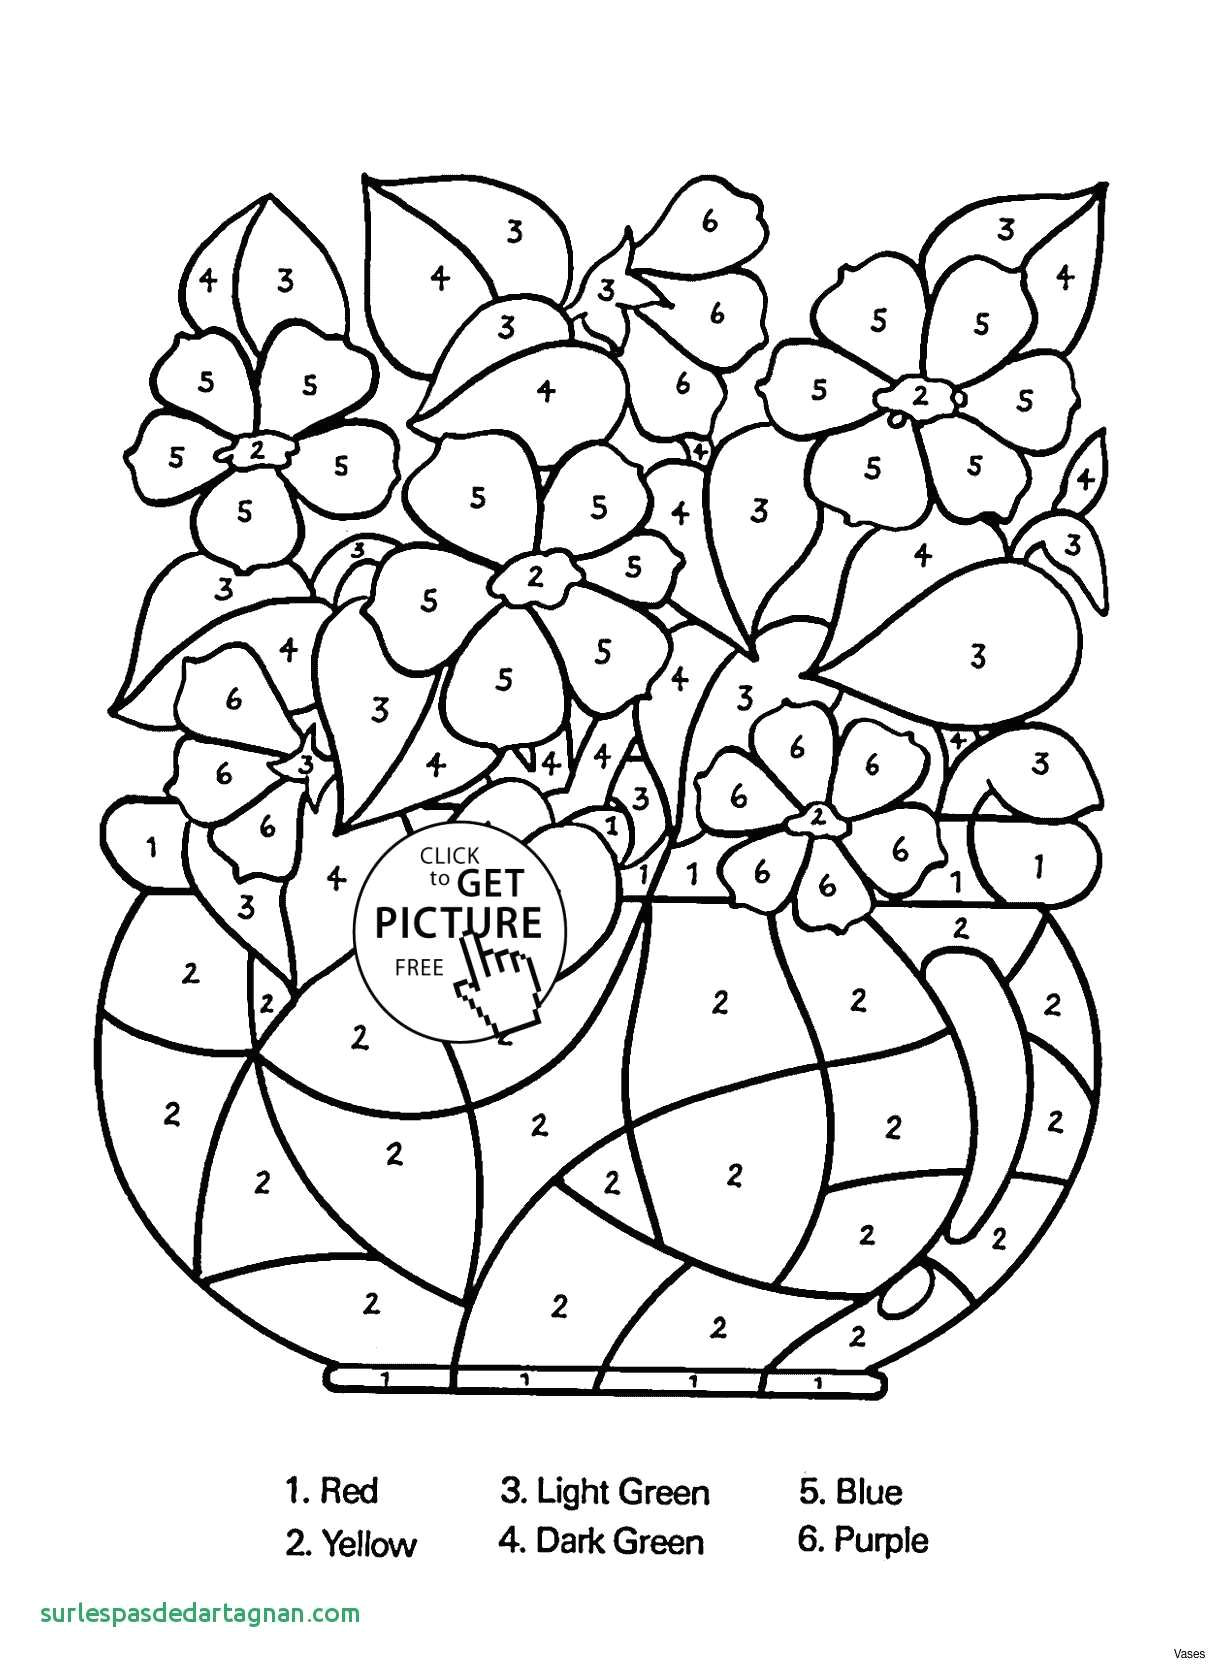 Easy Drawings Of Flower Vase Awesome Cool Patterns Black and White Easy to Draw Www Pantry